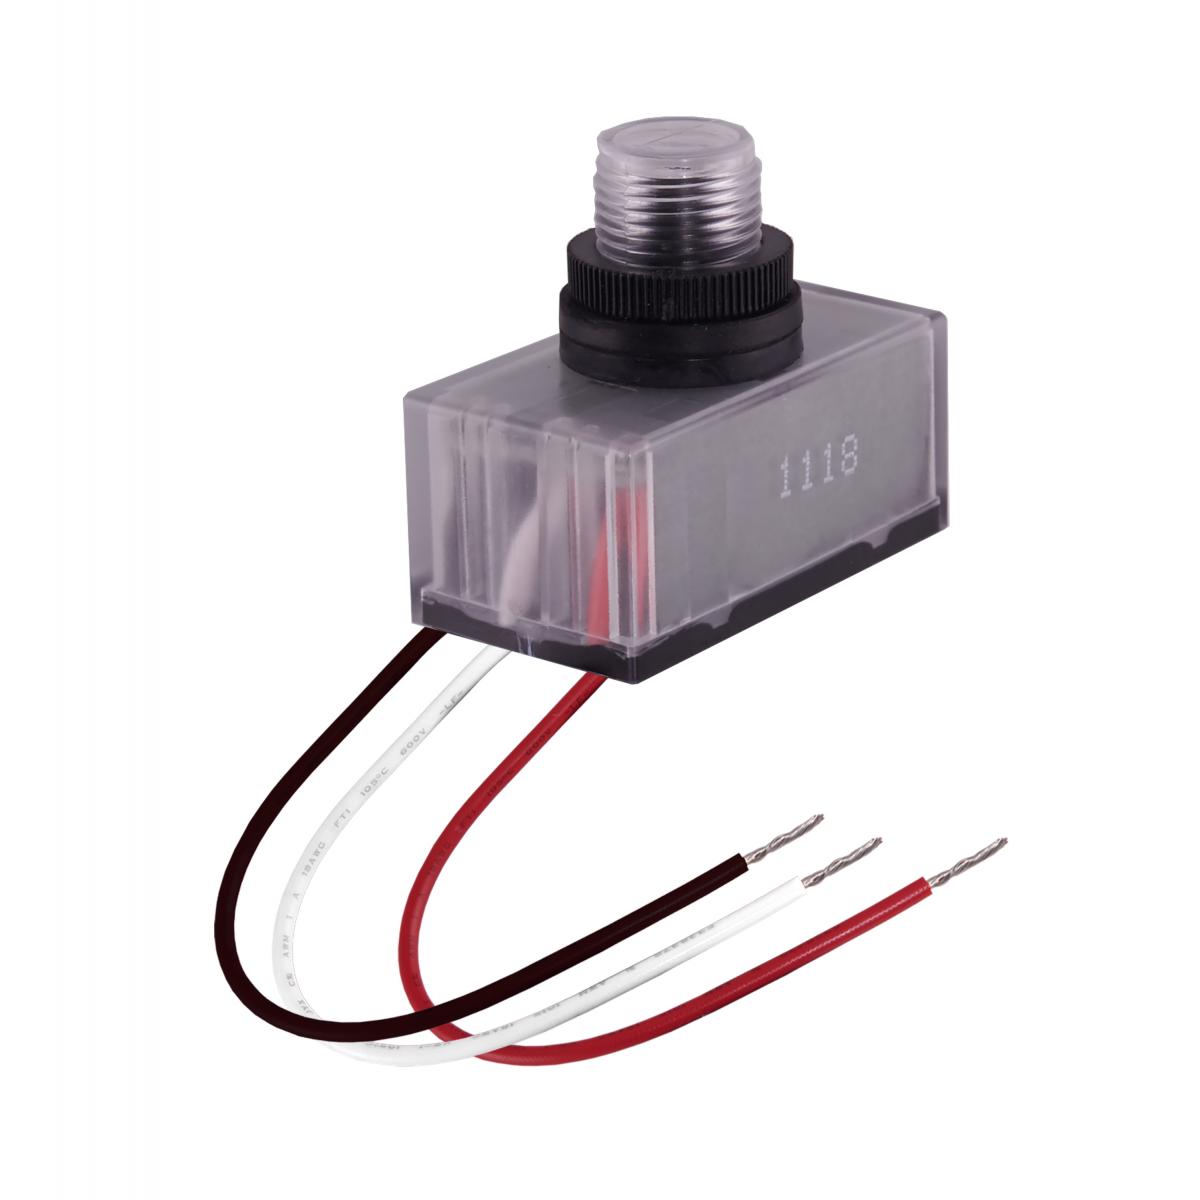 86-205 ADD ON PHOTOCELL